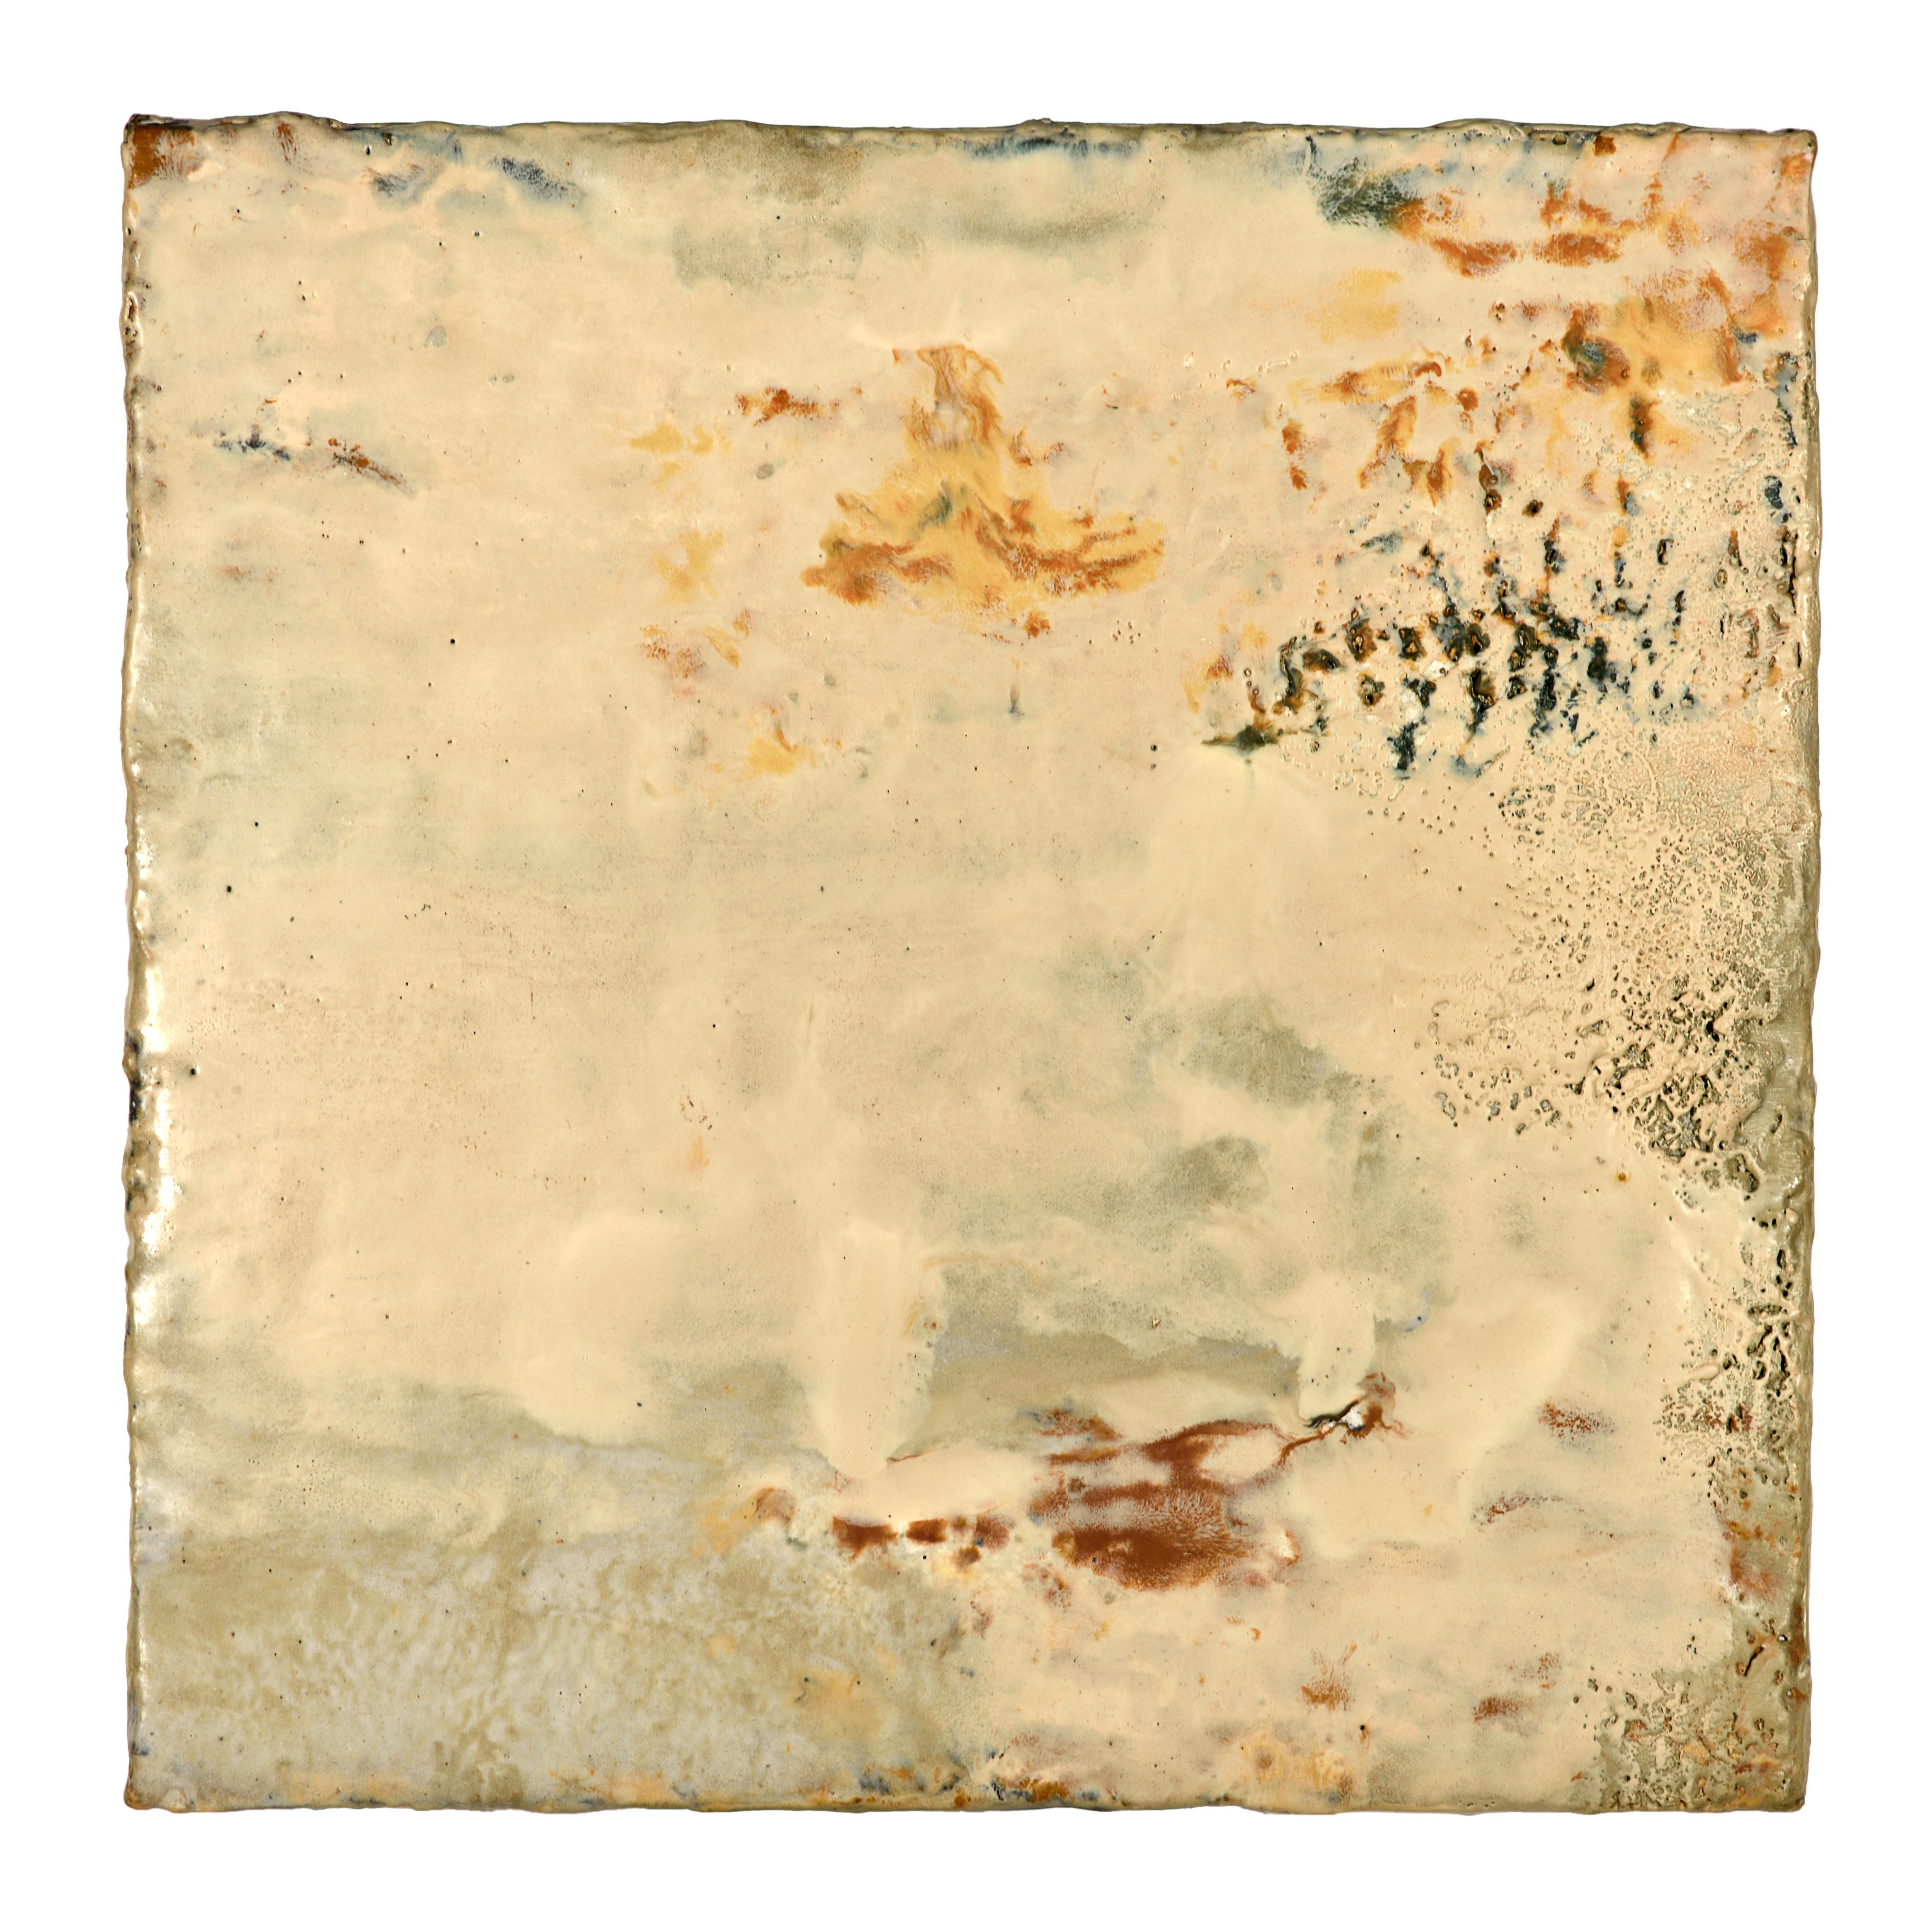 Modern Richard Hirsch Encaustic Painting of Nothing #26, 2012 For Sale